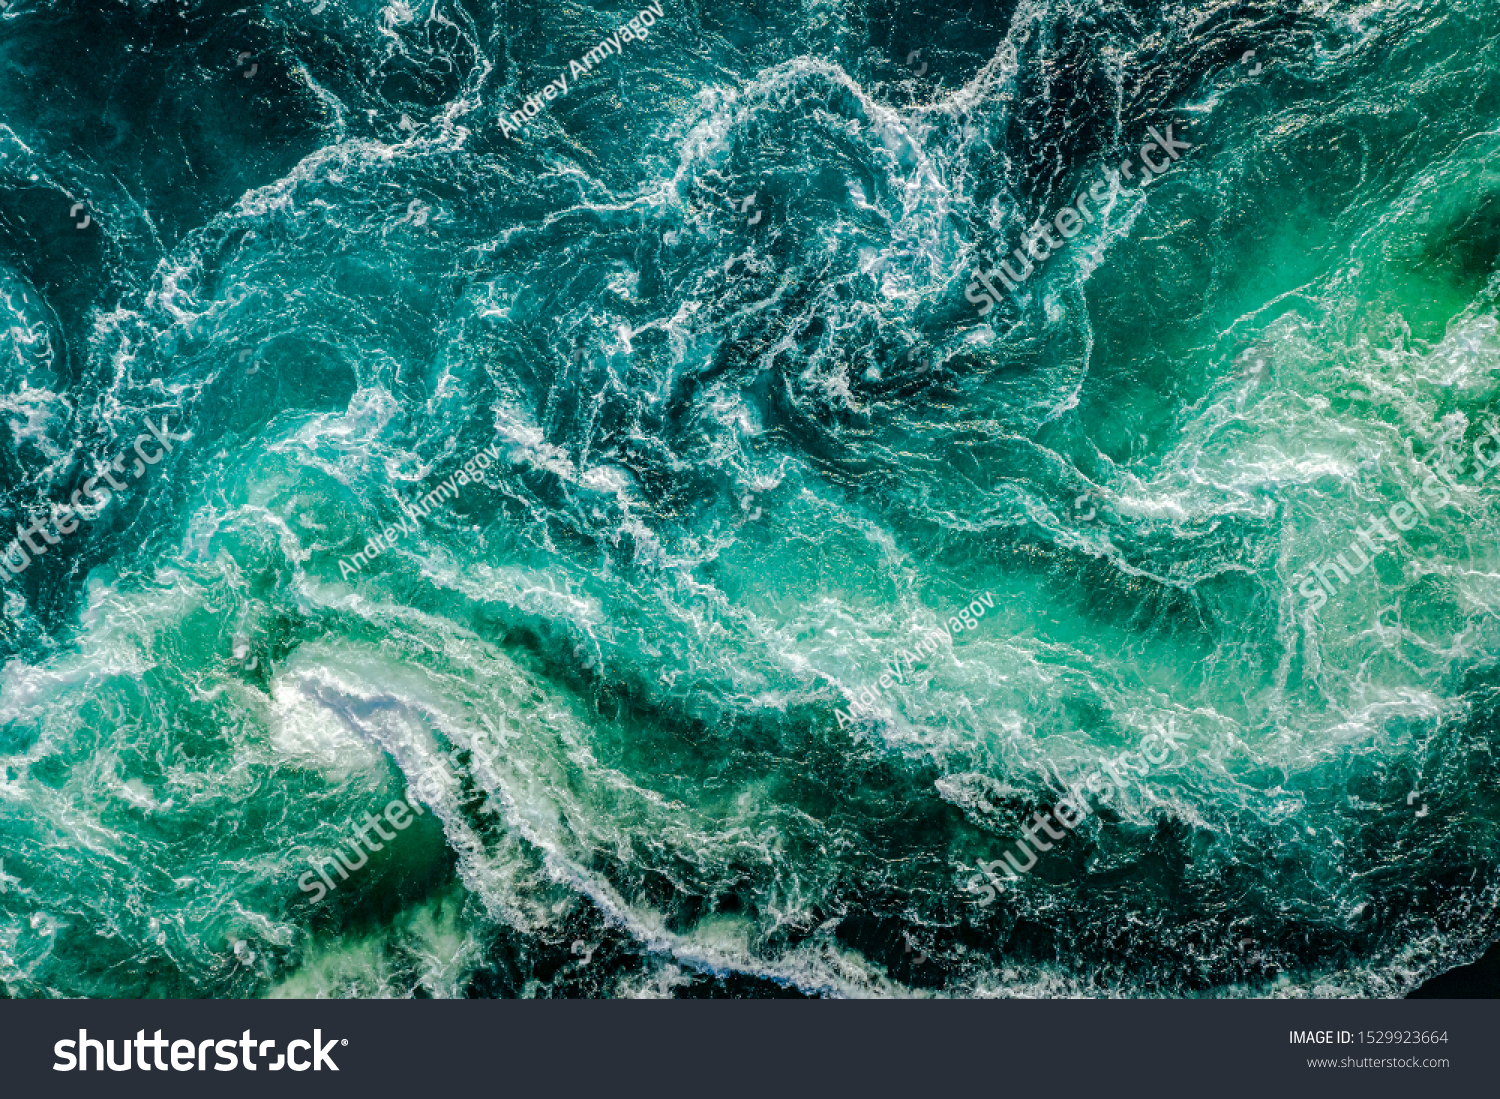 Waves of water of the river and the sea meet each other during high tide and low tide. Whirlpools of the maelstrom of Saltstraumen, Nordland, Norway #1529923664